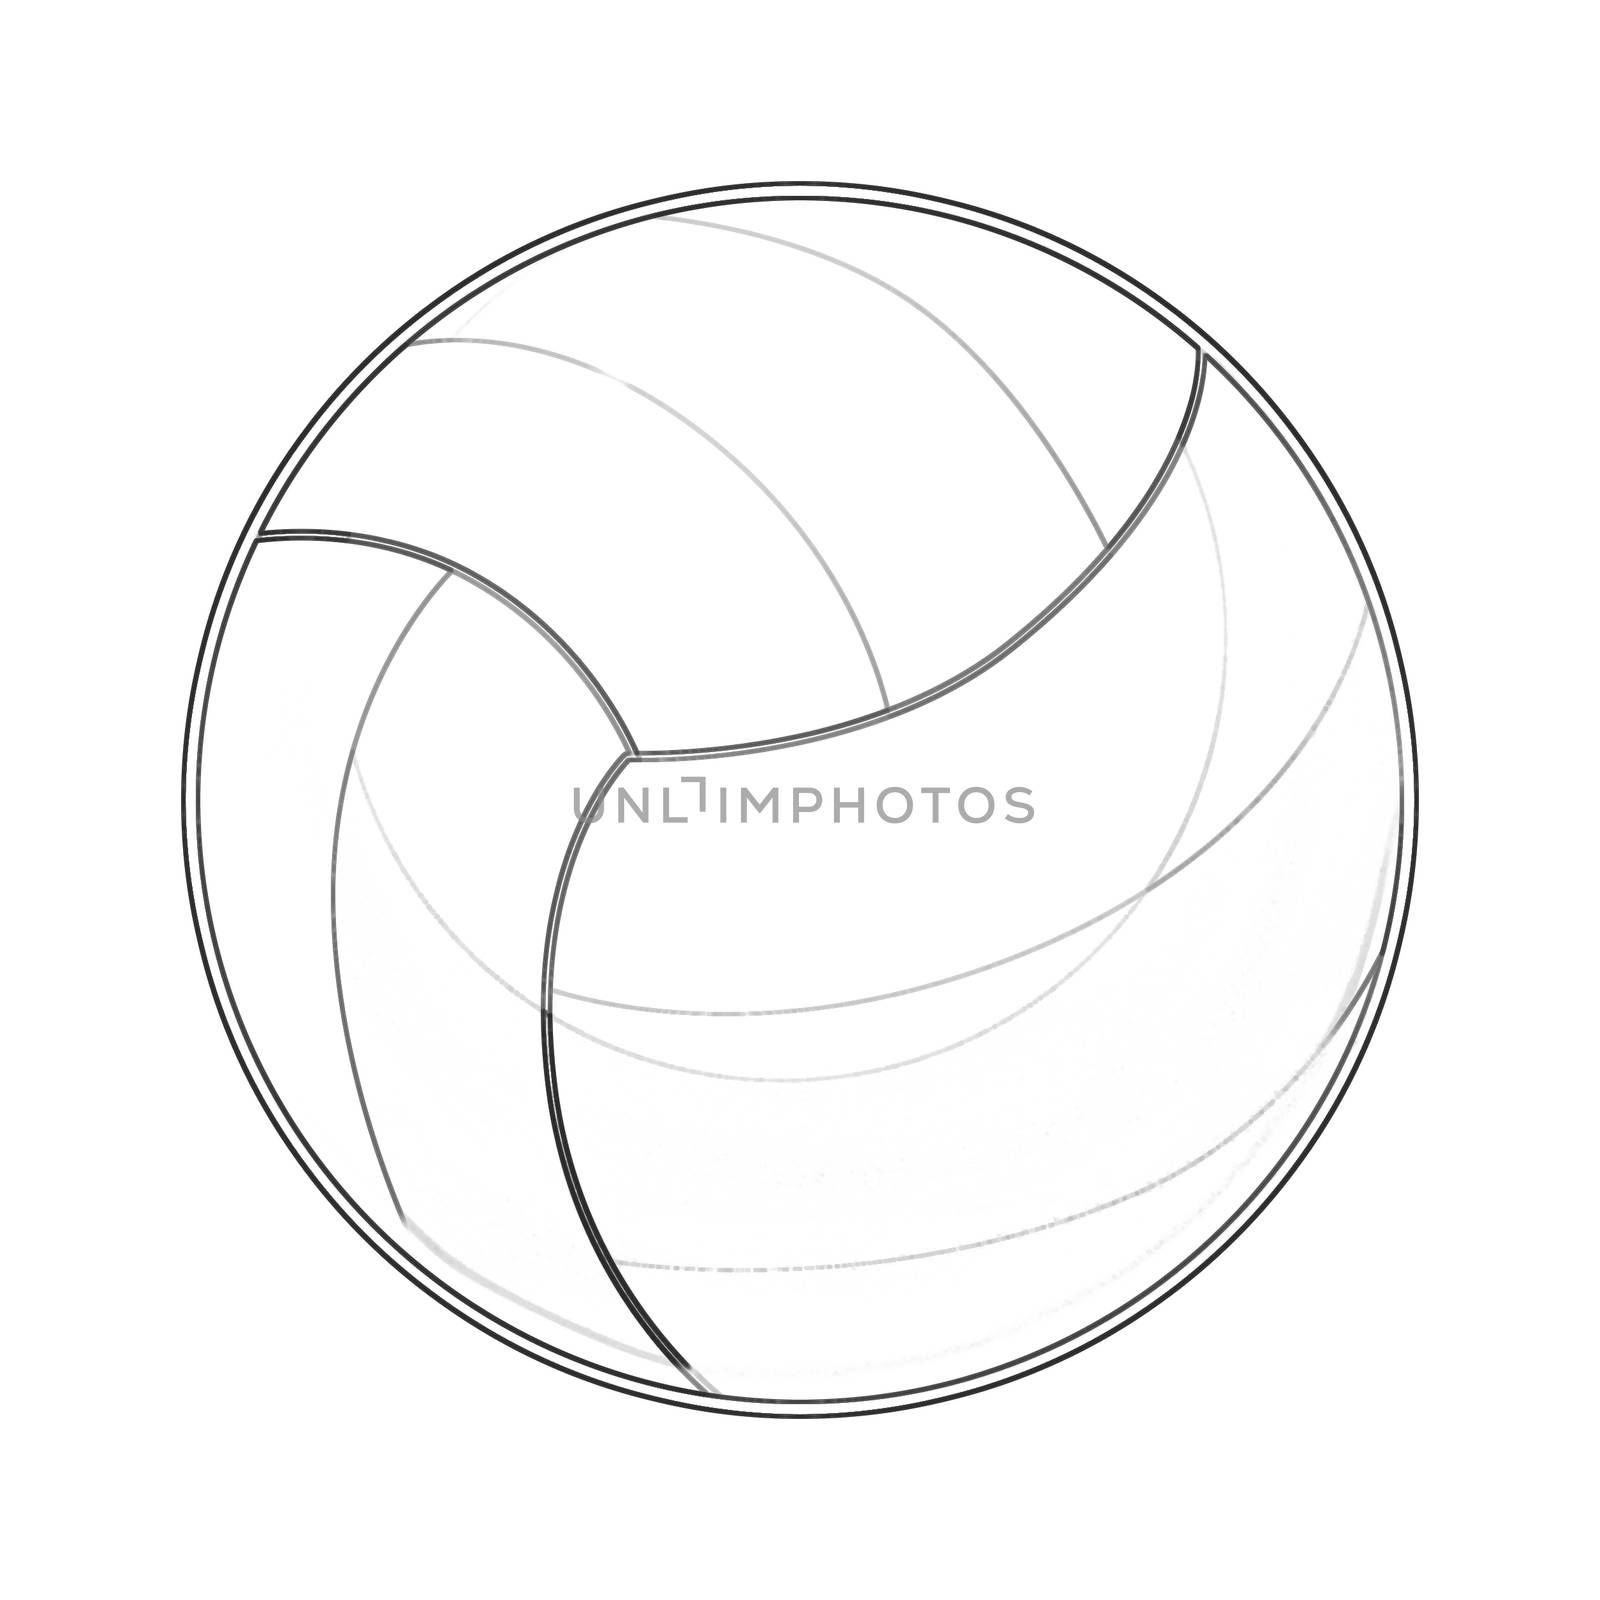 Illustration: Coloring Book Series: Sport Ball: Volleyball. Soft thin line. Print it and bring it to Life with Color! Fantastic Outline / Sketch / Line Art Design. by NextMars